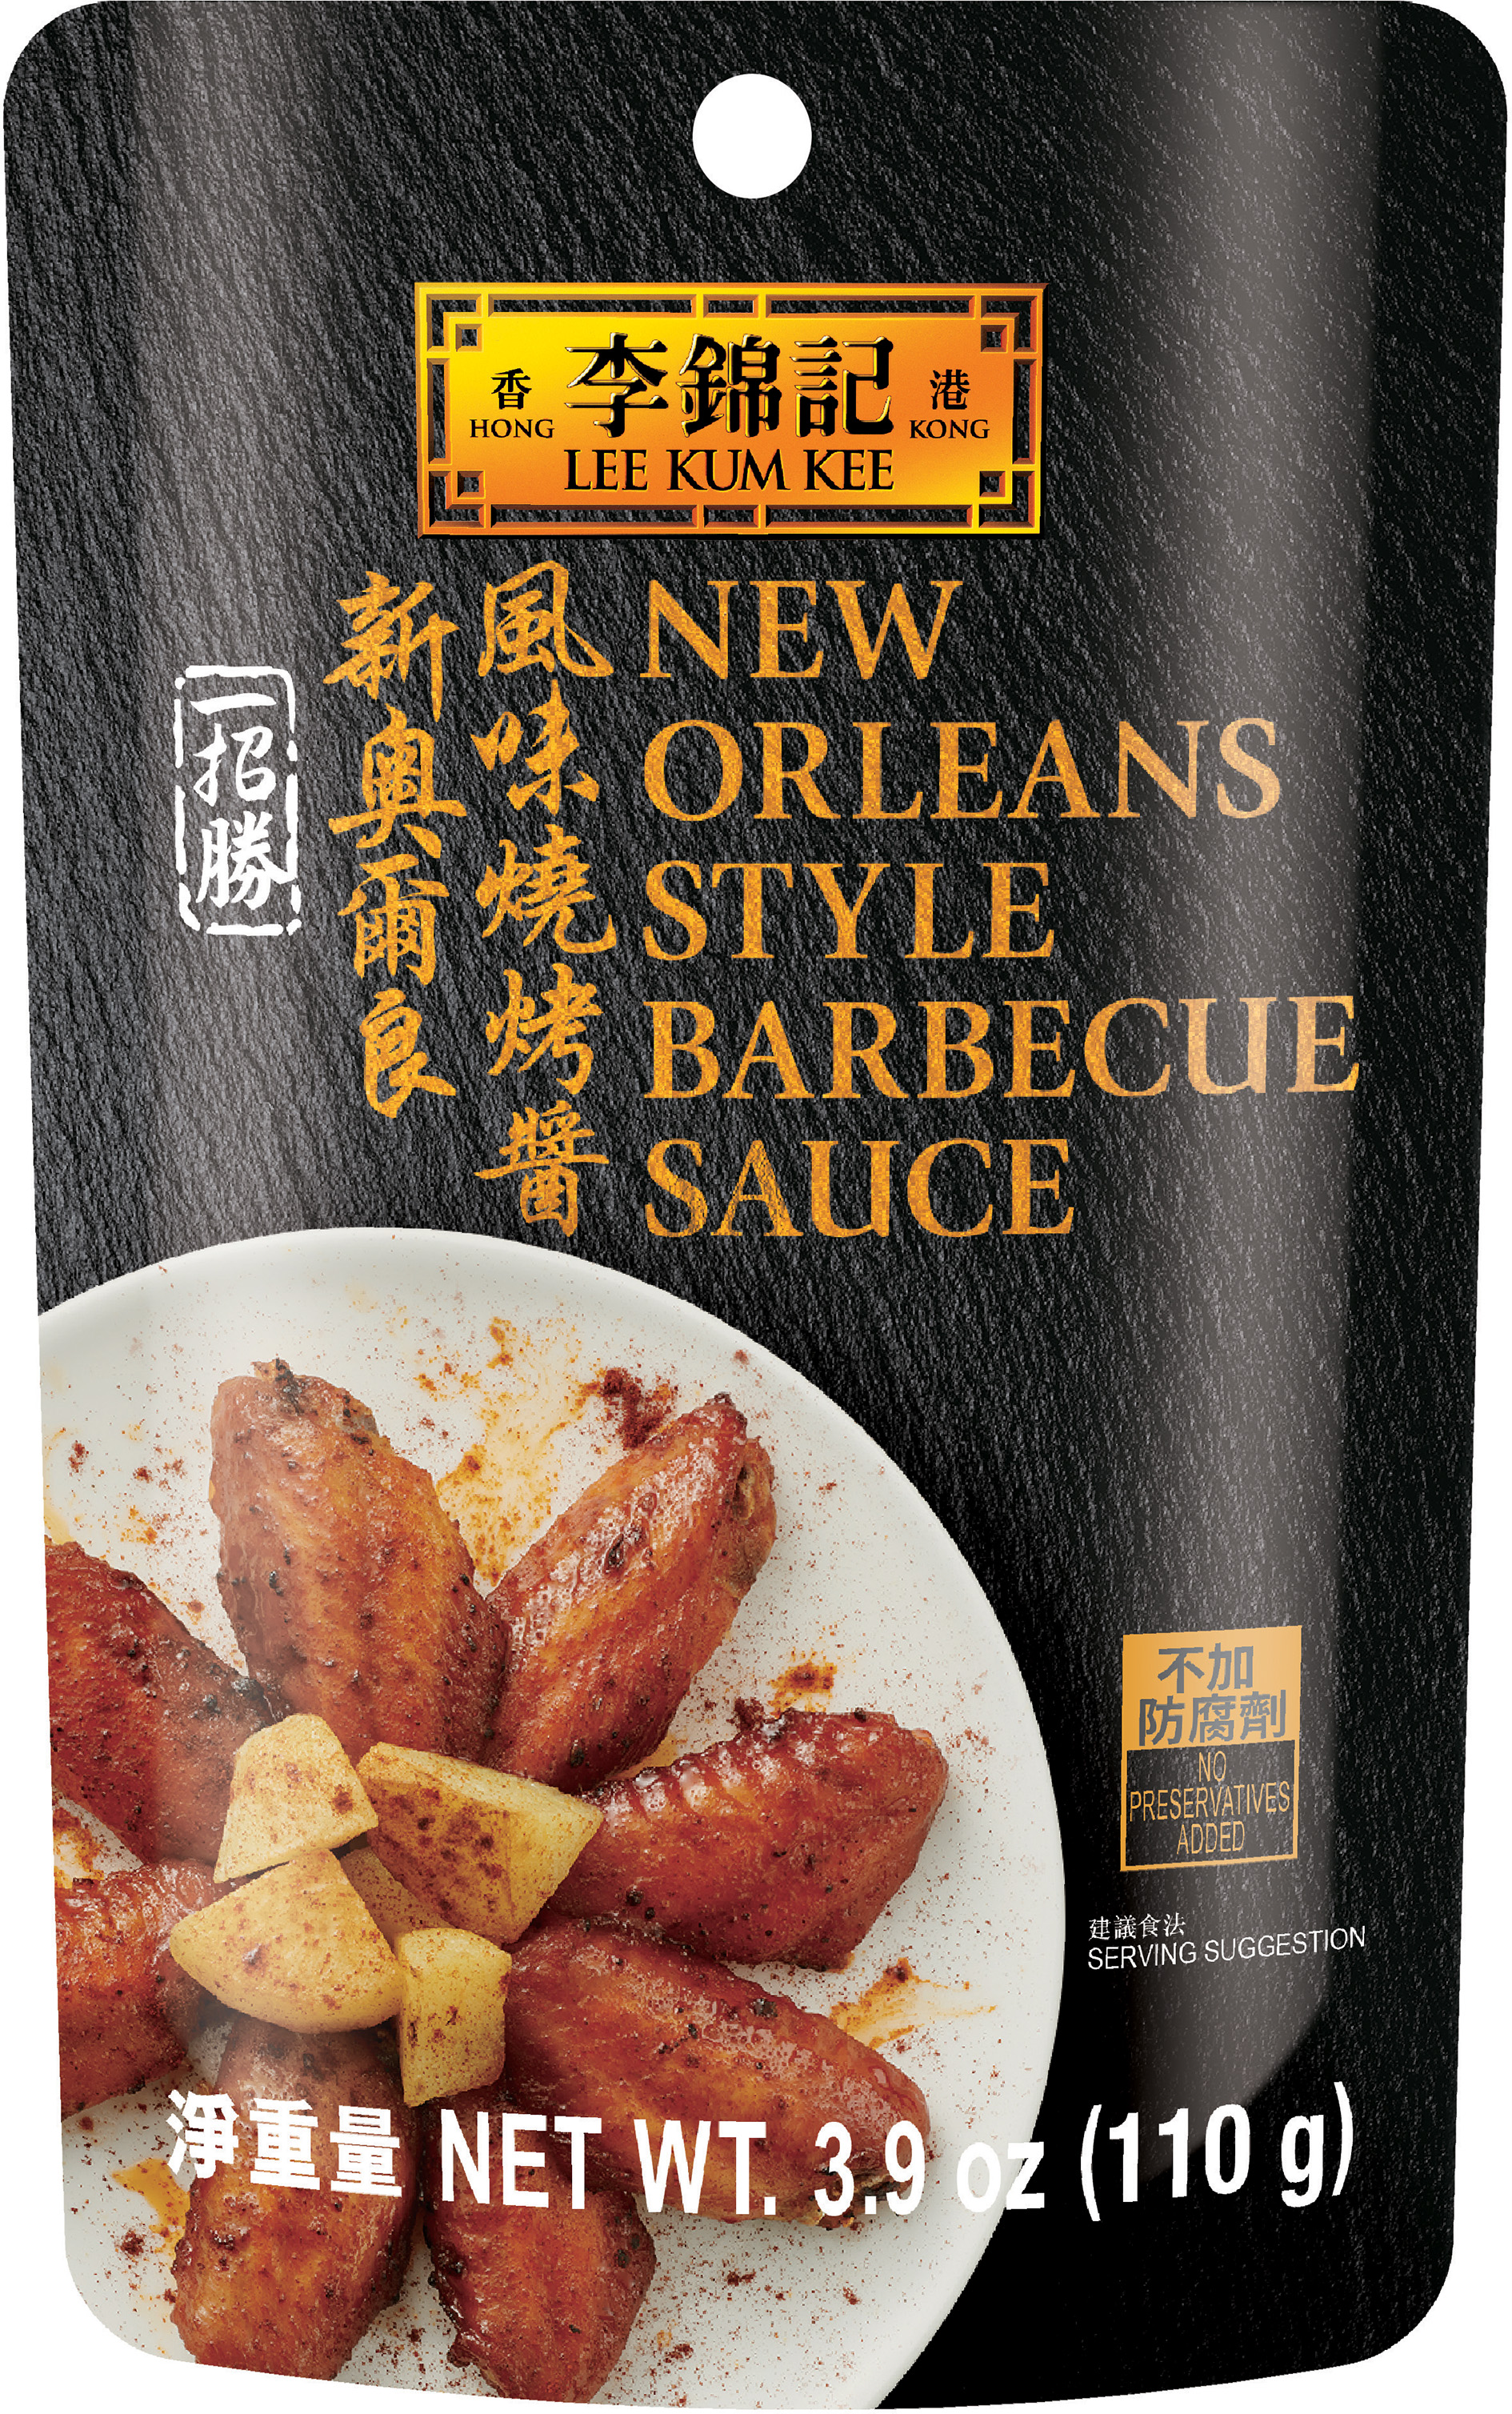 New Orleans Style Barbecue Sauce 3.9 oz (110 g) Sauce Pack